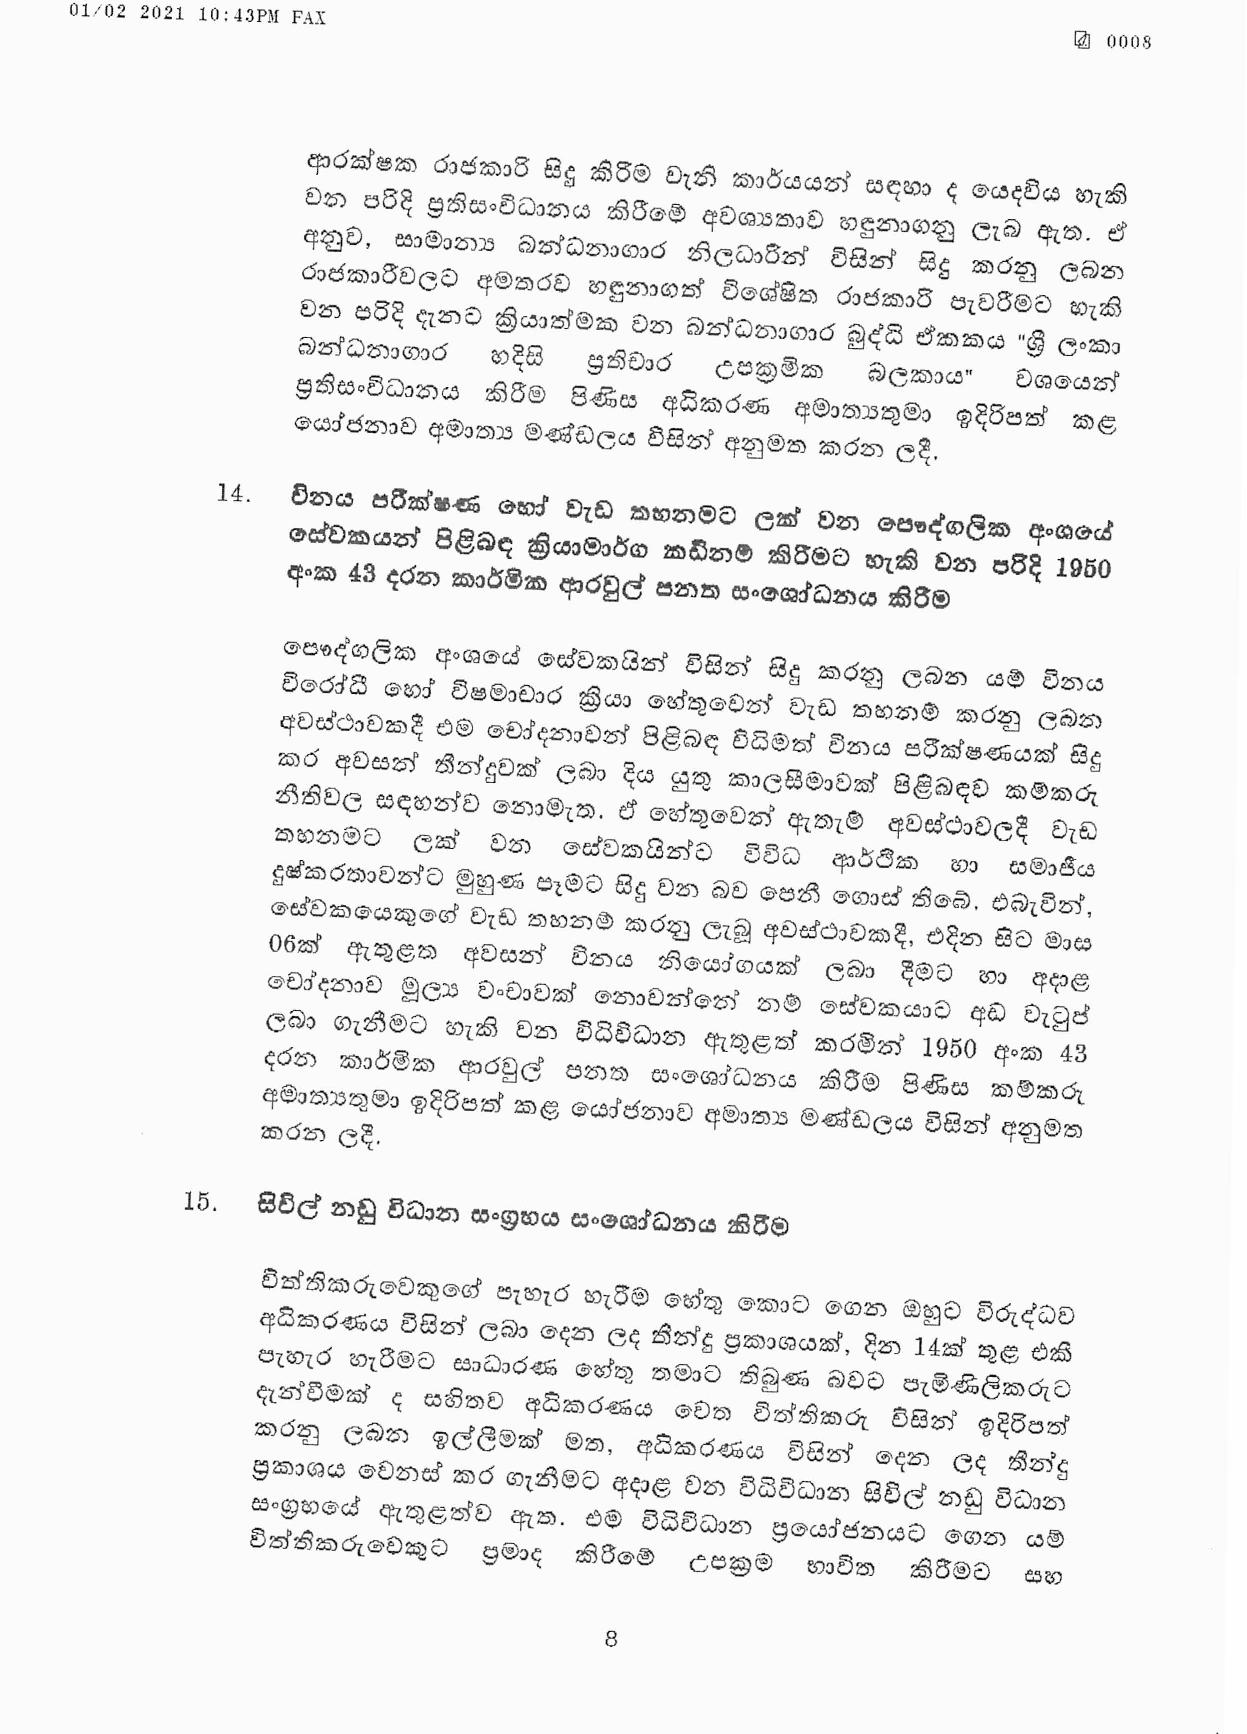 Cabinet Decision on 01.02.2021 page 008